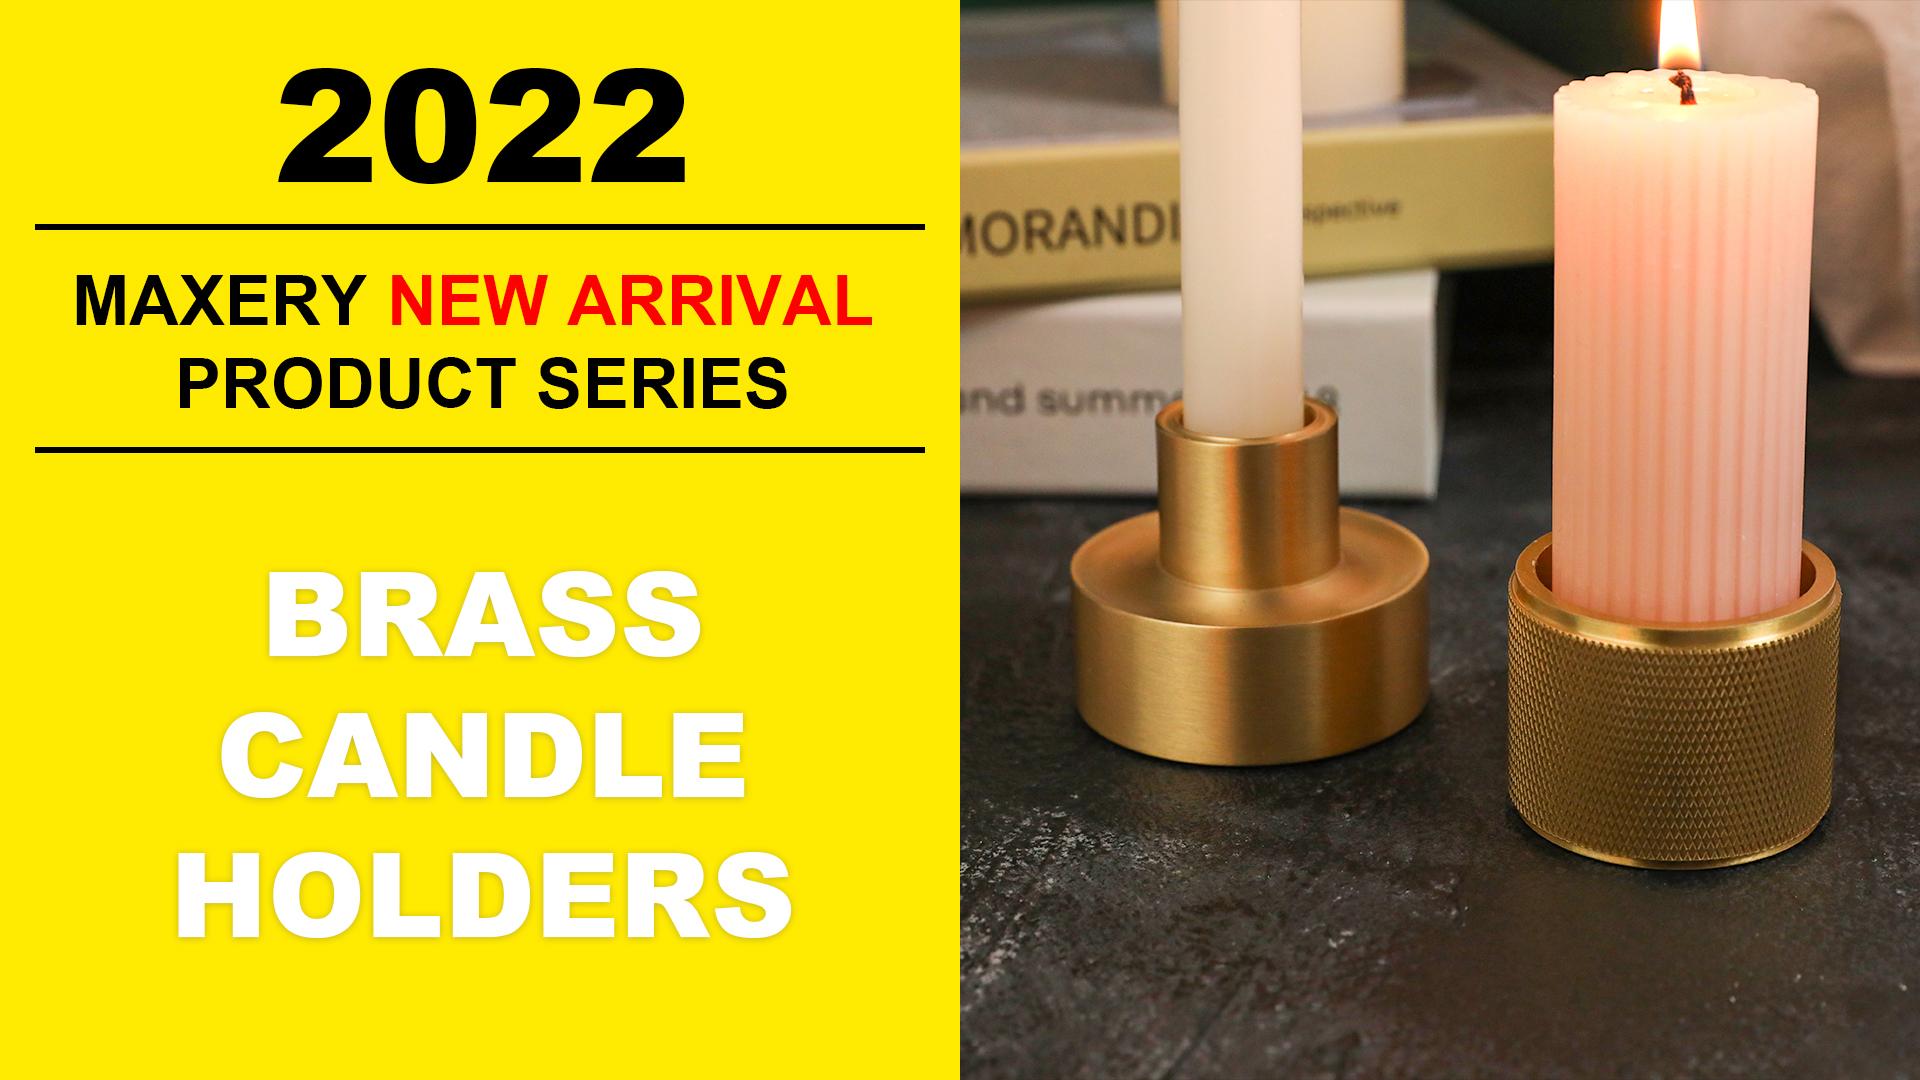 Maxery Hot Product Introduction-No. 5 Knurl Brass Candle holders